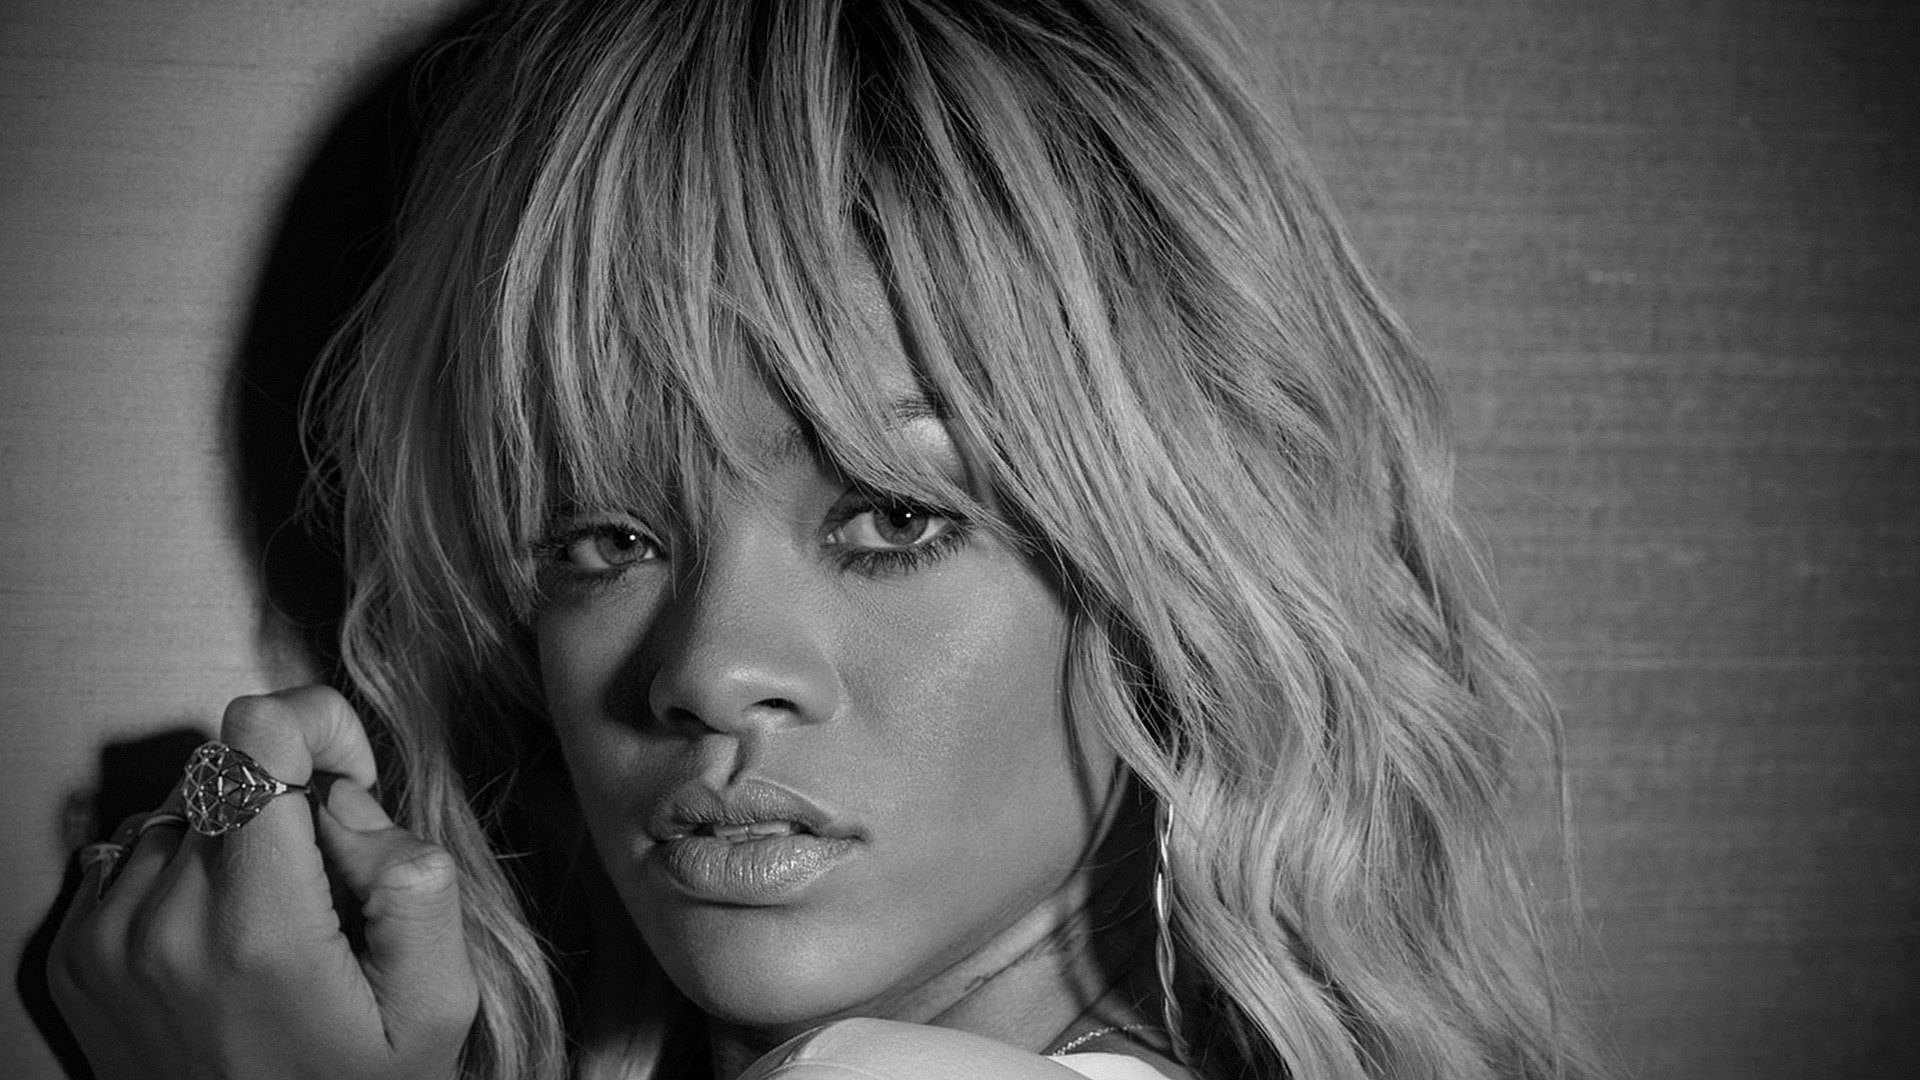 Rihanna Black and White for 1920 x 1080 HDTV 1080p resolution